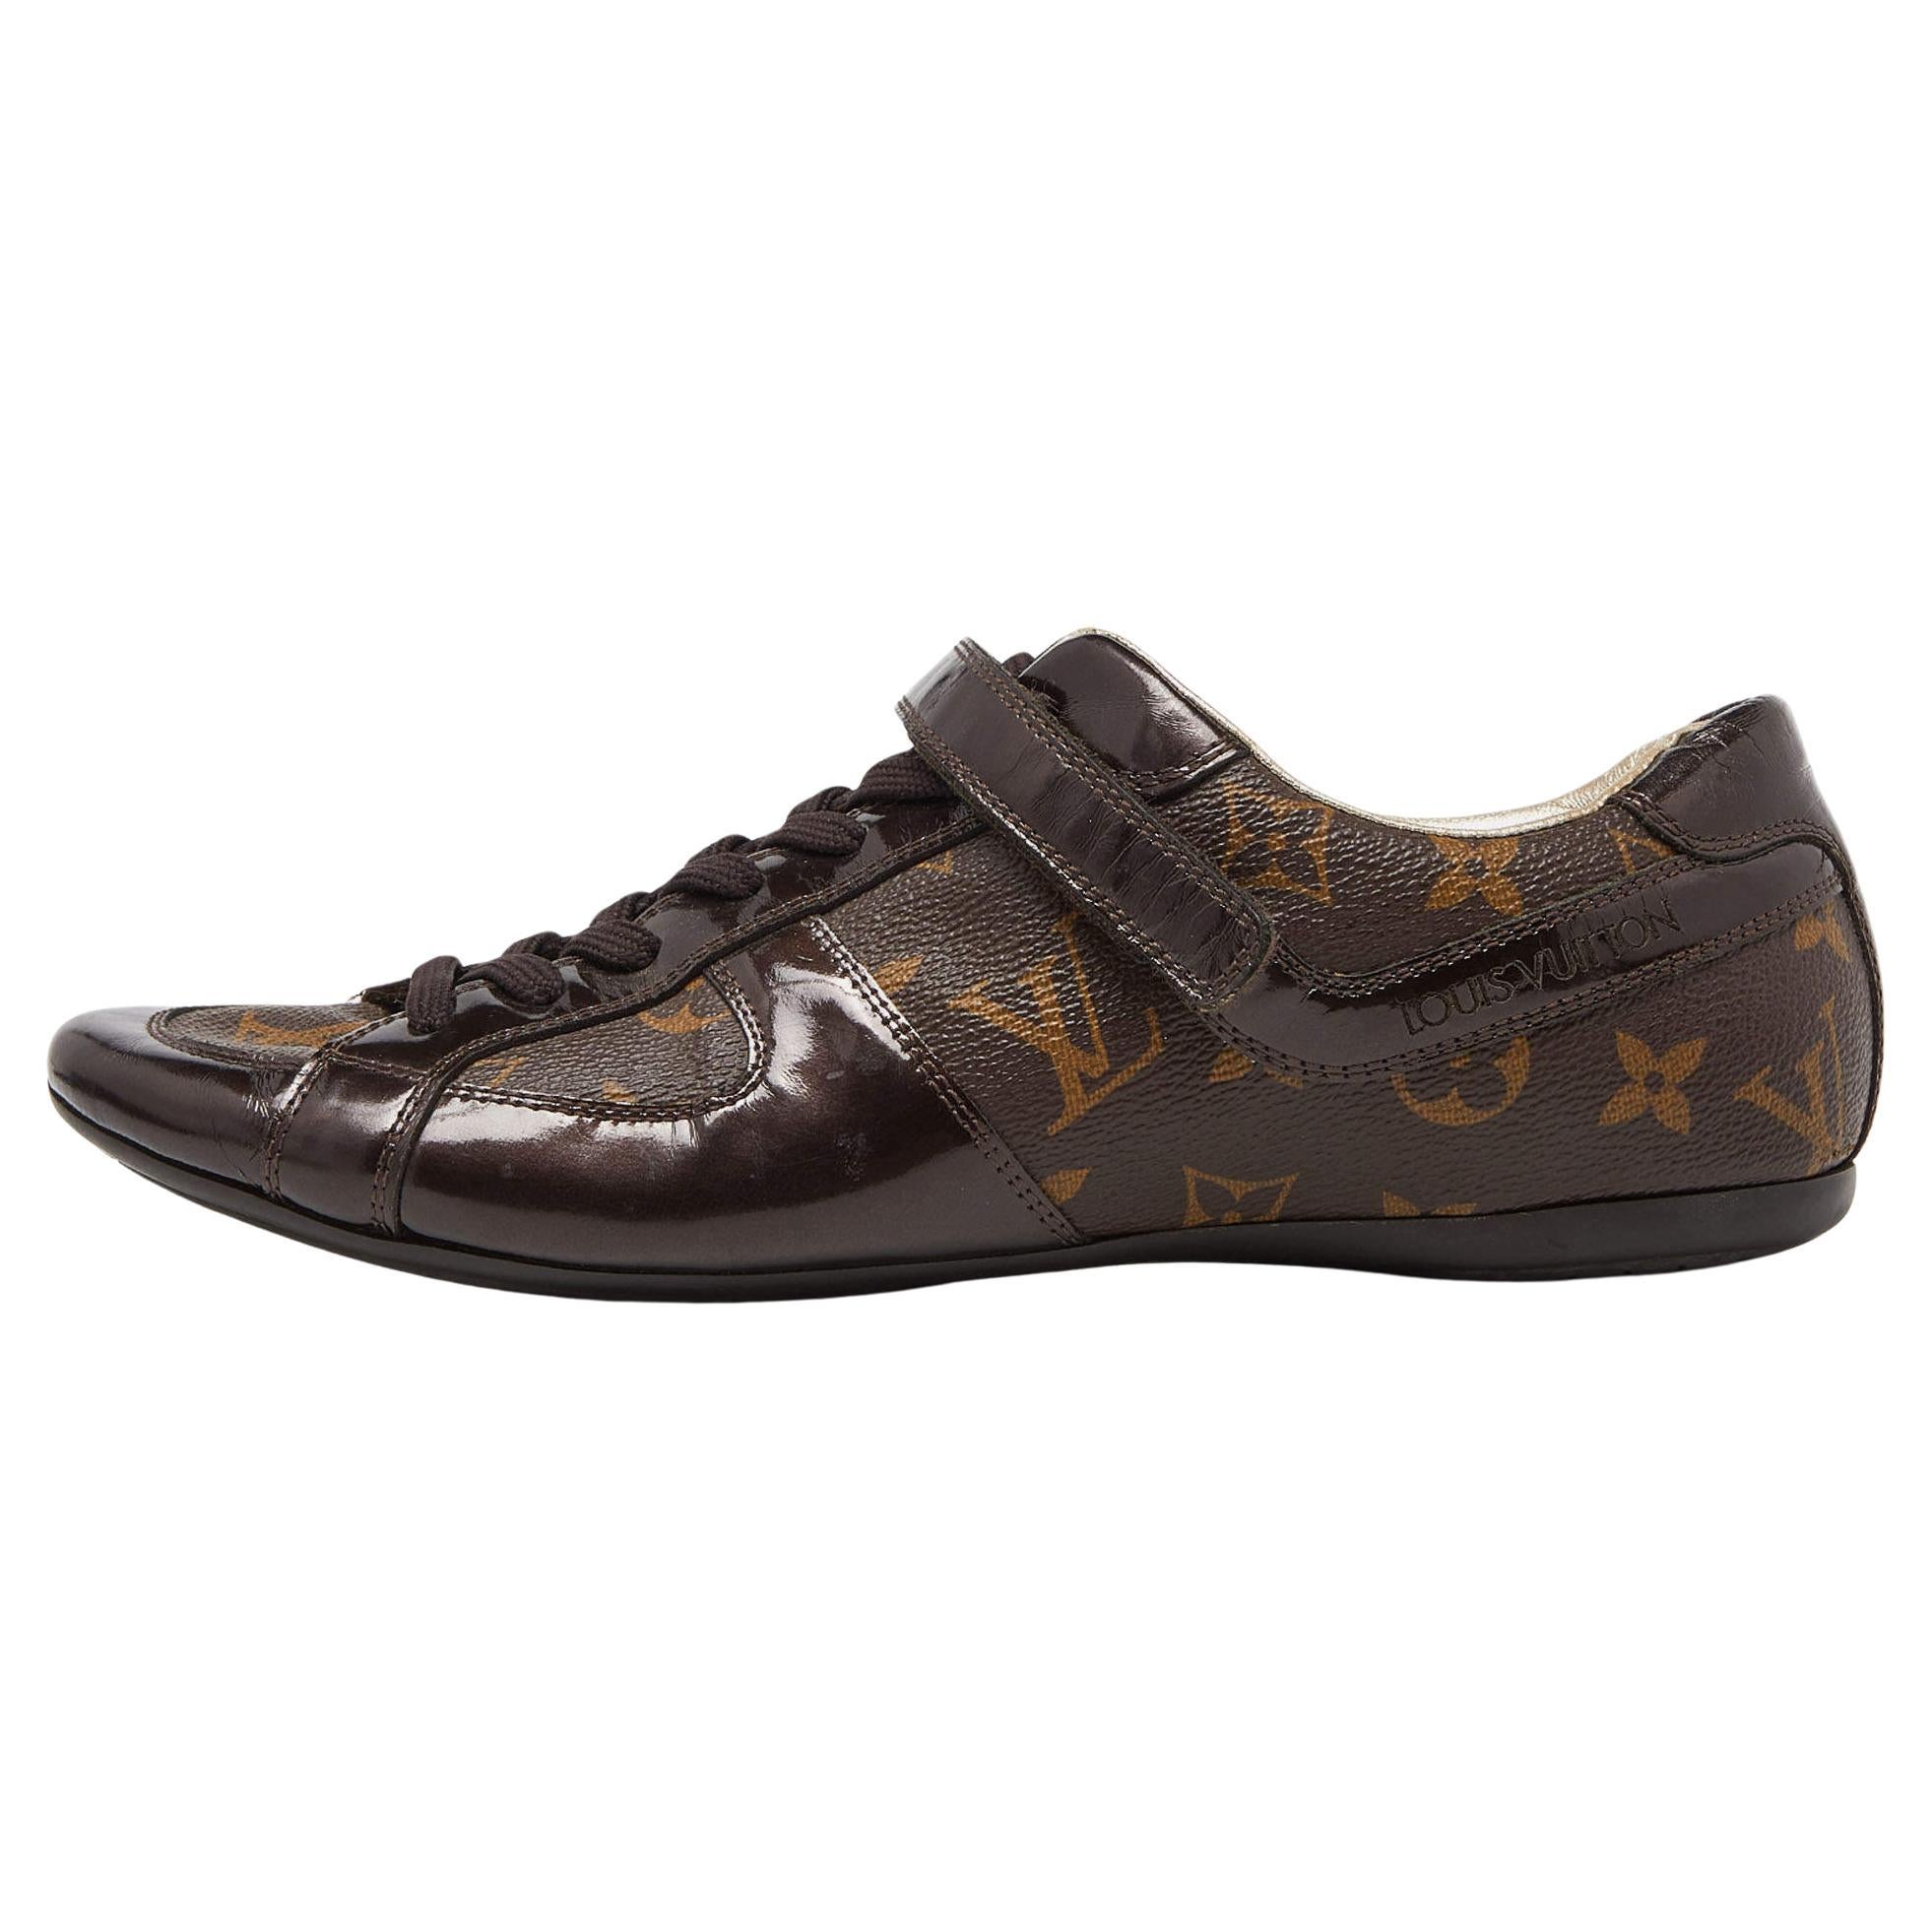 Louis Vuitton Brown Monogram Canvas and Patent Leather Gloe Trotter Sneakers Siz For Sale